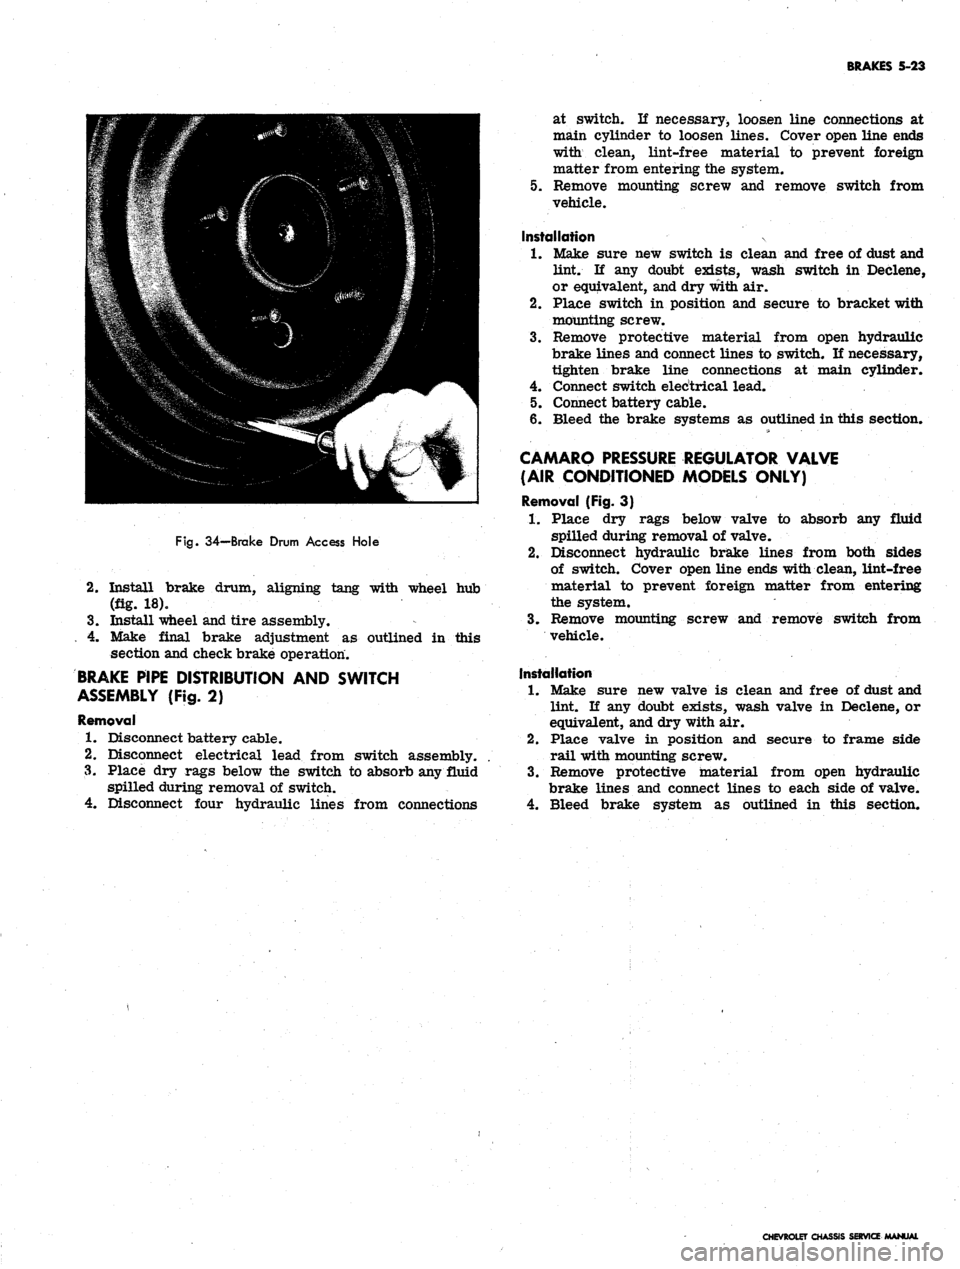 CHEVROLET CAMARO 1967 1.G Chassis Service Manual 
BRAKES 5-23

Fig.
 34—Brake Drum Access Hole

2.

Install brake drum, aligning tang with wheel hub

(fig. 18).

3.
 Install wheel and tire assembly.

. 4. Make final brake adjustment as outlined in